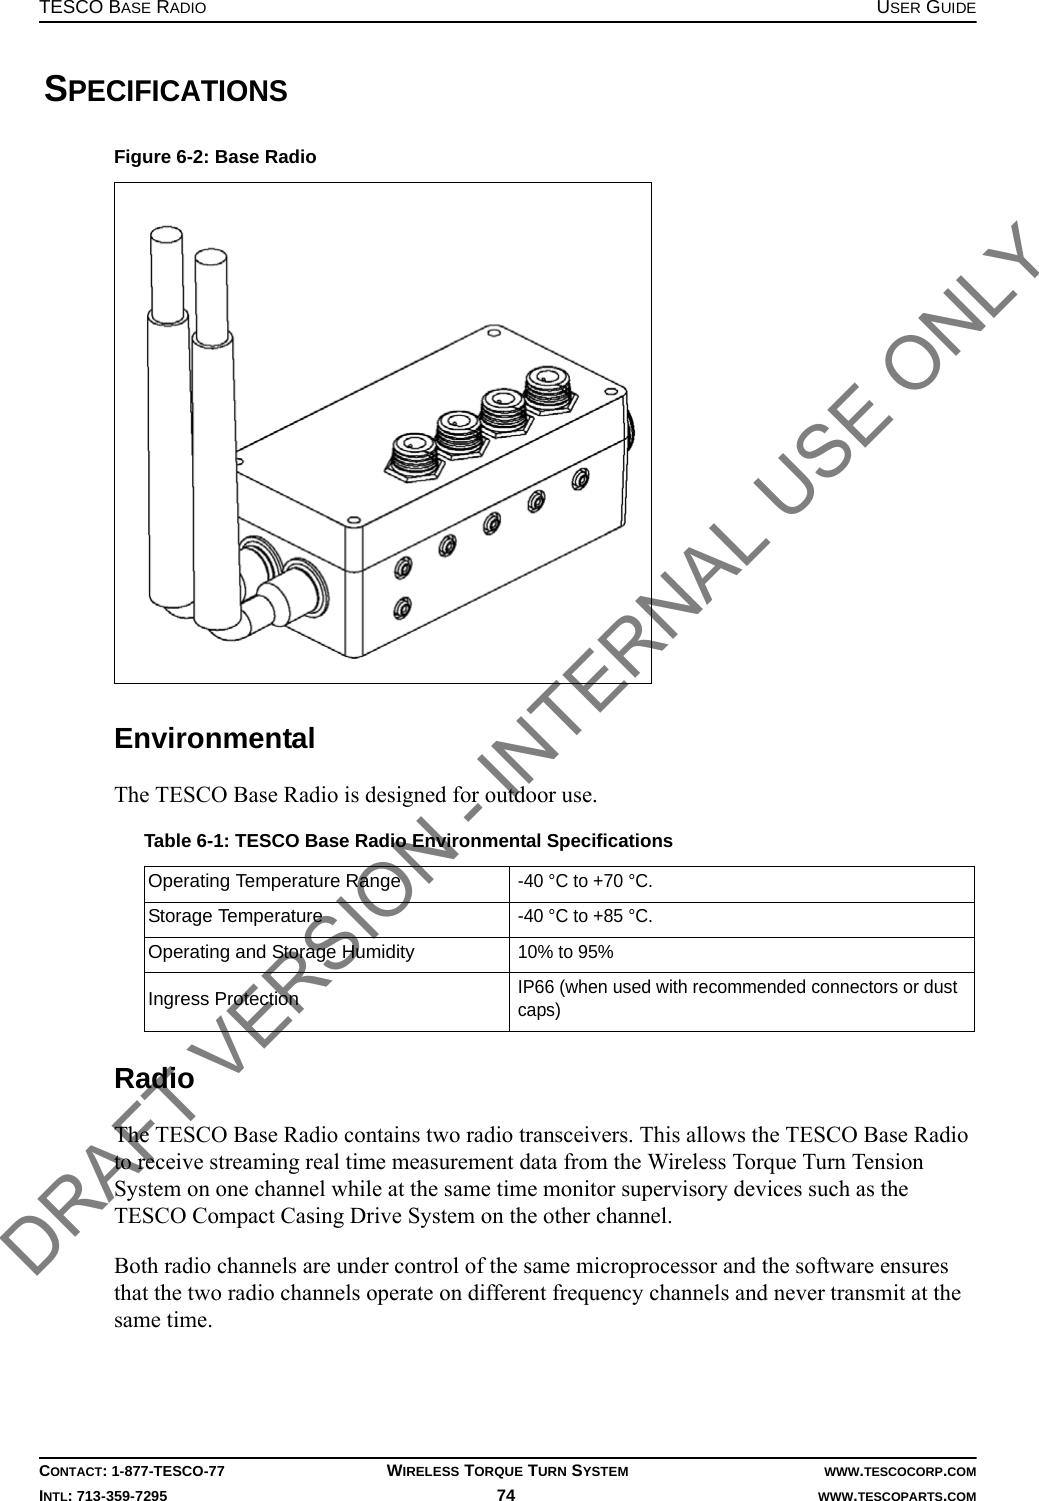 TESCO BASE RADIO USER GUIDECONTACT: 1-877-TESCO-77 WIRELESS TORQUE TURN SYSTEM WWW.TESCOCORP.COMINTL: 713-359-7295 74    WWW.TESCOPARTS.COM SPECIFICATIONSEnvironmentalThe TESCO Base Radio is designed for outdoor use.RadioThe TESCO Base Radio contains two radio transceivers. This allows the TESCO Base Radio to receive streaming real time measurement data from the Wireless Torque Turn Tension System on one channel while at the same time monitor supervisory devices such as the TESCO Compact Casing Drive System on the other channel.Both radio channels are under control of the same microprocessor and the software ensures that the two radio channels operate on different frequency channels and never transmit at the same time.Figure 6-2: Base RadioTable 6-1: TESCO Base Radio Environmental SpecificationsOperating Temperature Range-40 °C to +70 °C.Storage Temperature-40 °C to +85 °C.Operating and Storage Humidity10% to 95%Ingress ProtectionIP66 (when used with recommended connectors or dust caps)DRAFT VERSION - INTERNAL USE ONLY